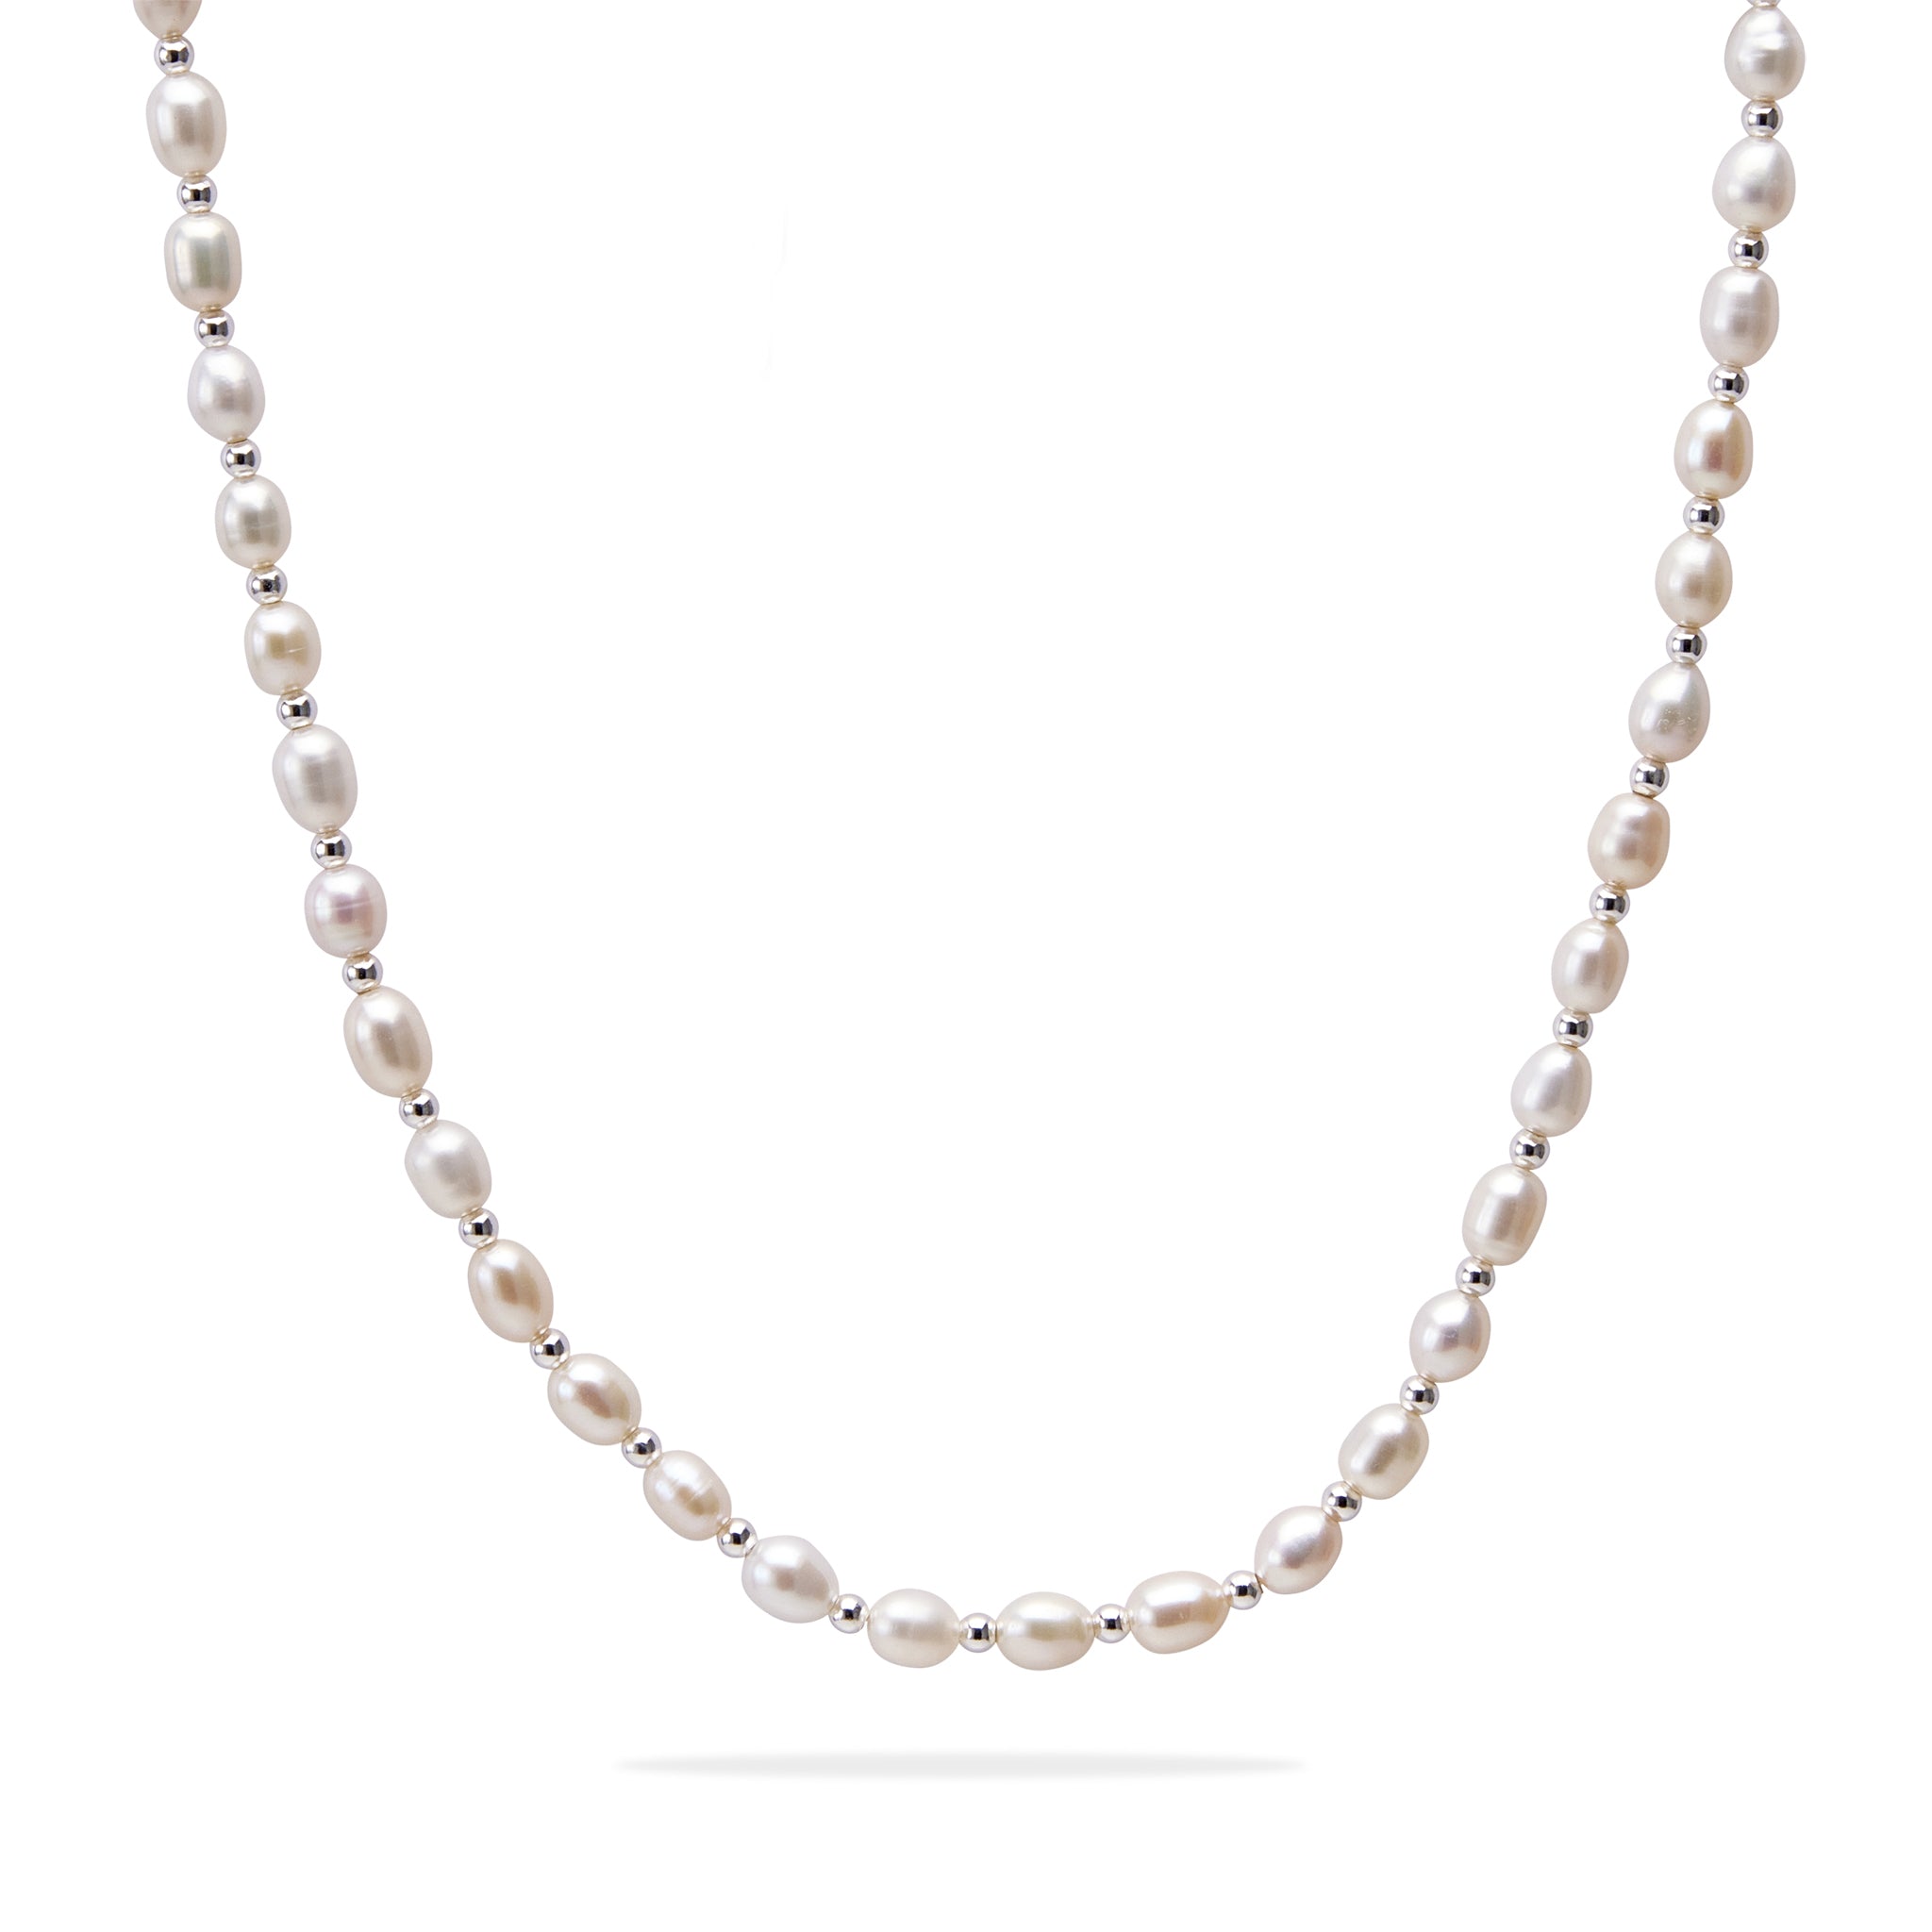 Pearl_Necklace_01.jpg